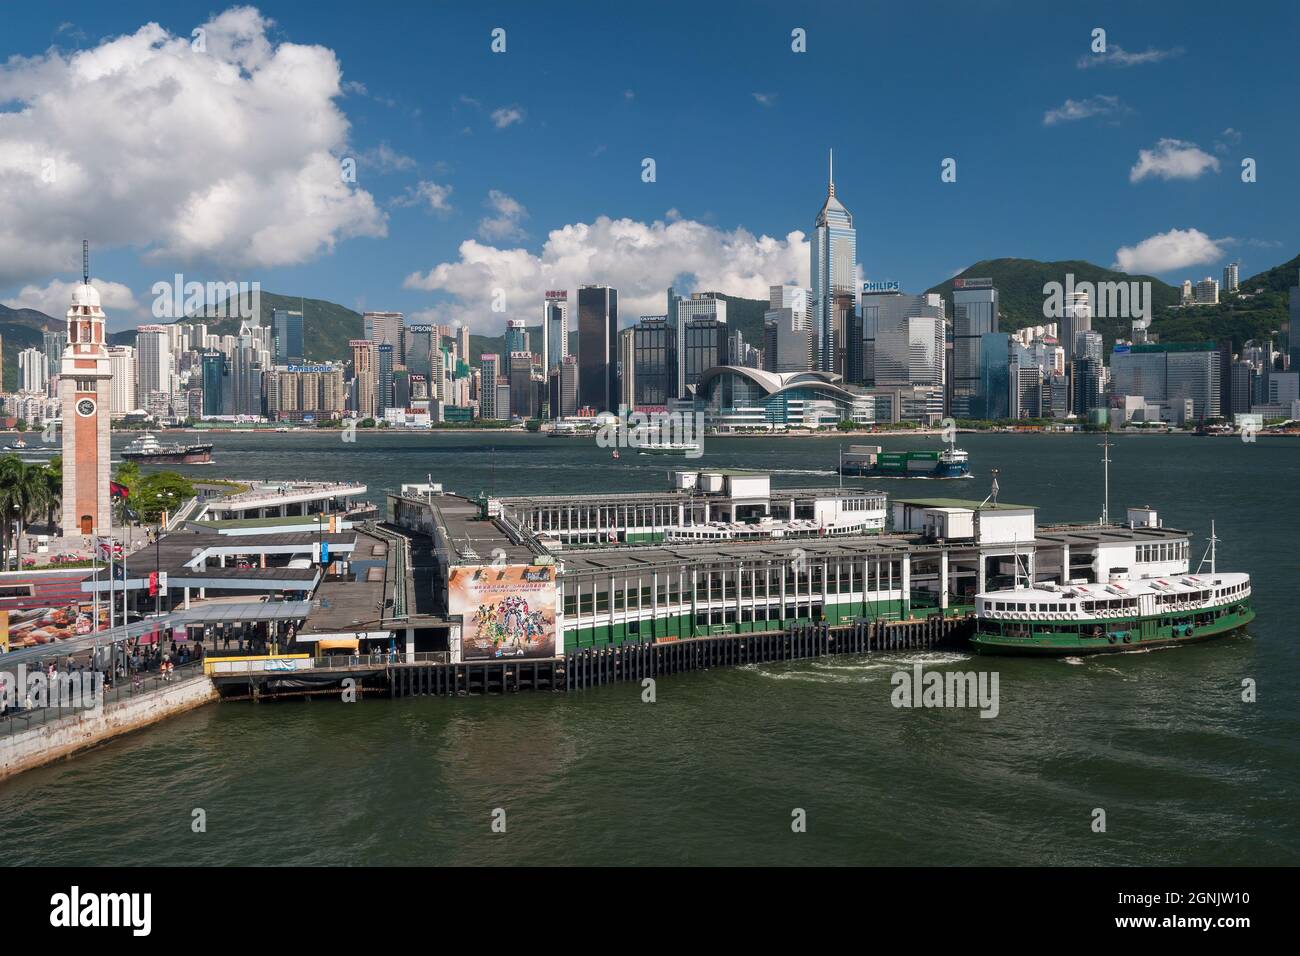 A Star Ferry leaves Tsim Sha Tsui pier in Kowloon, with Wan Chai and Causeway Bay, Hong Kong Island, visible across Victoria Harbour Stock Photo